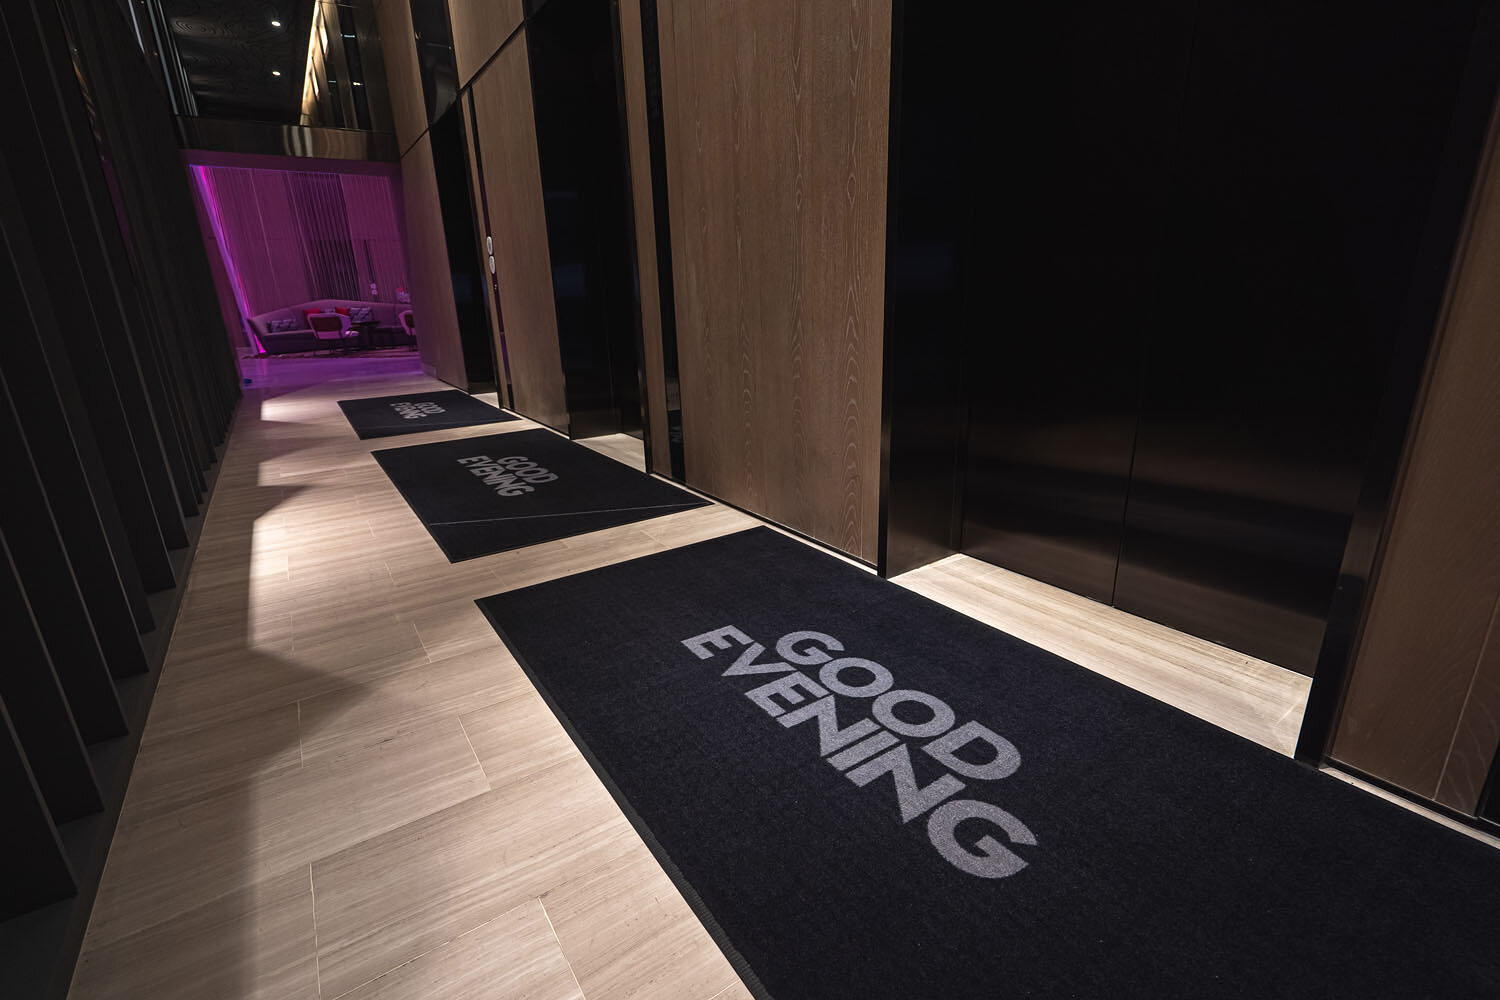  Floor mats in front of the lifts of W hotels are changed thrice a day 